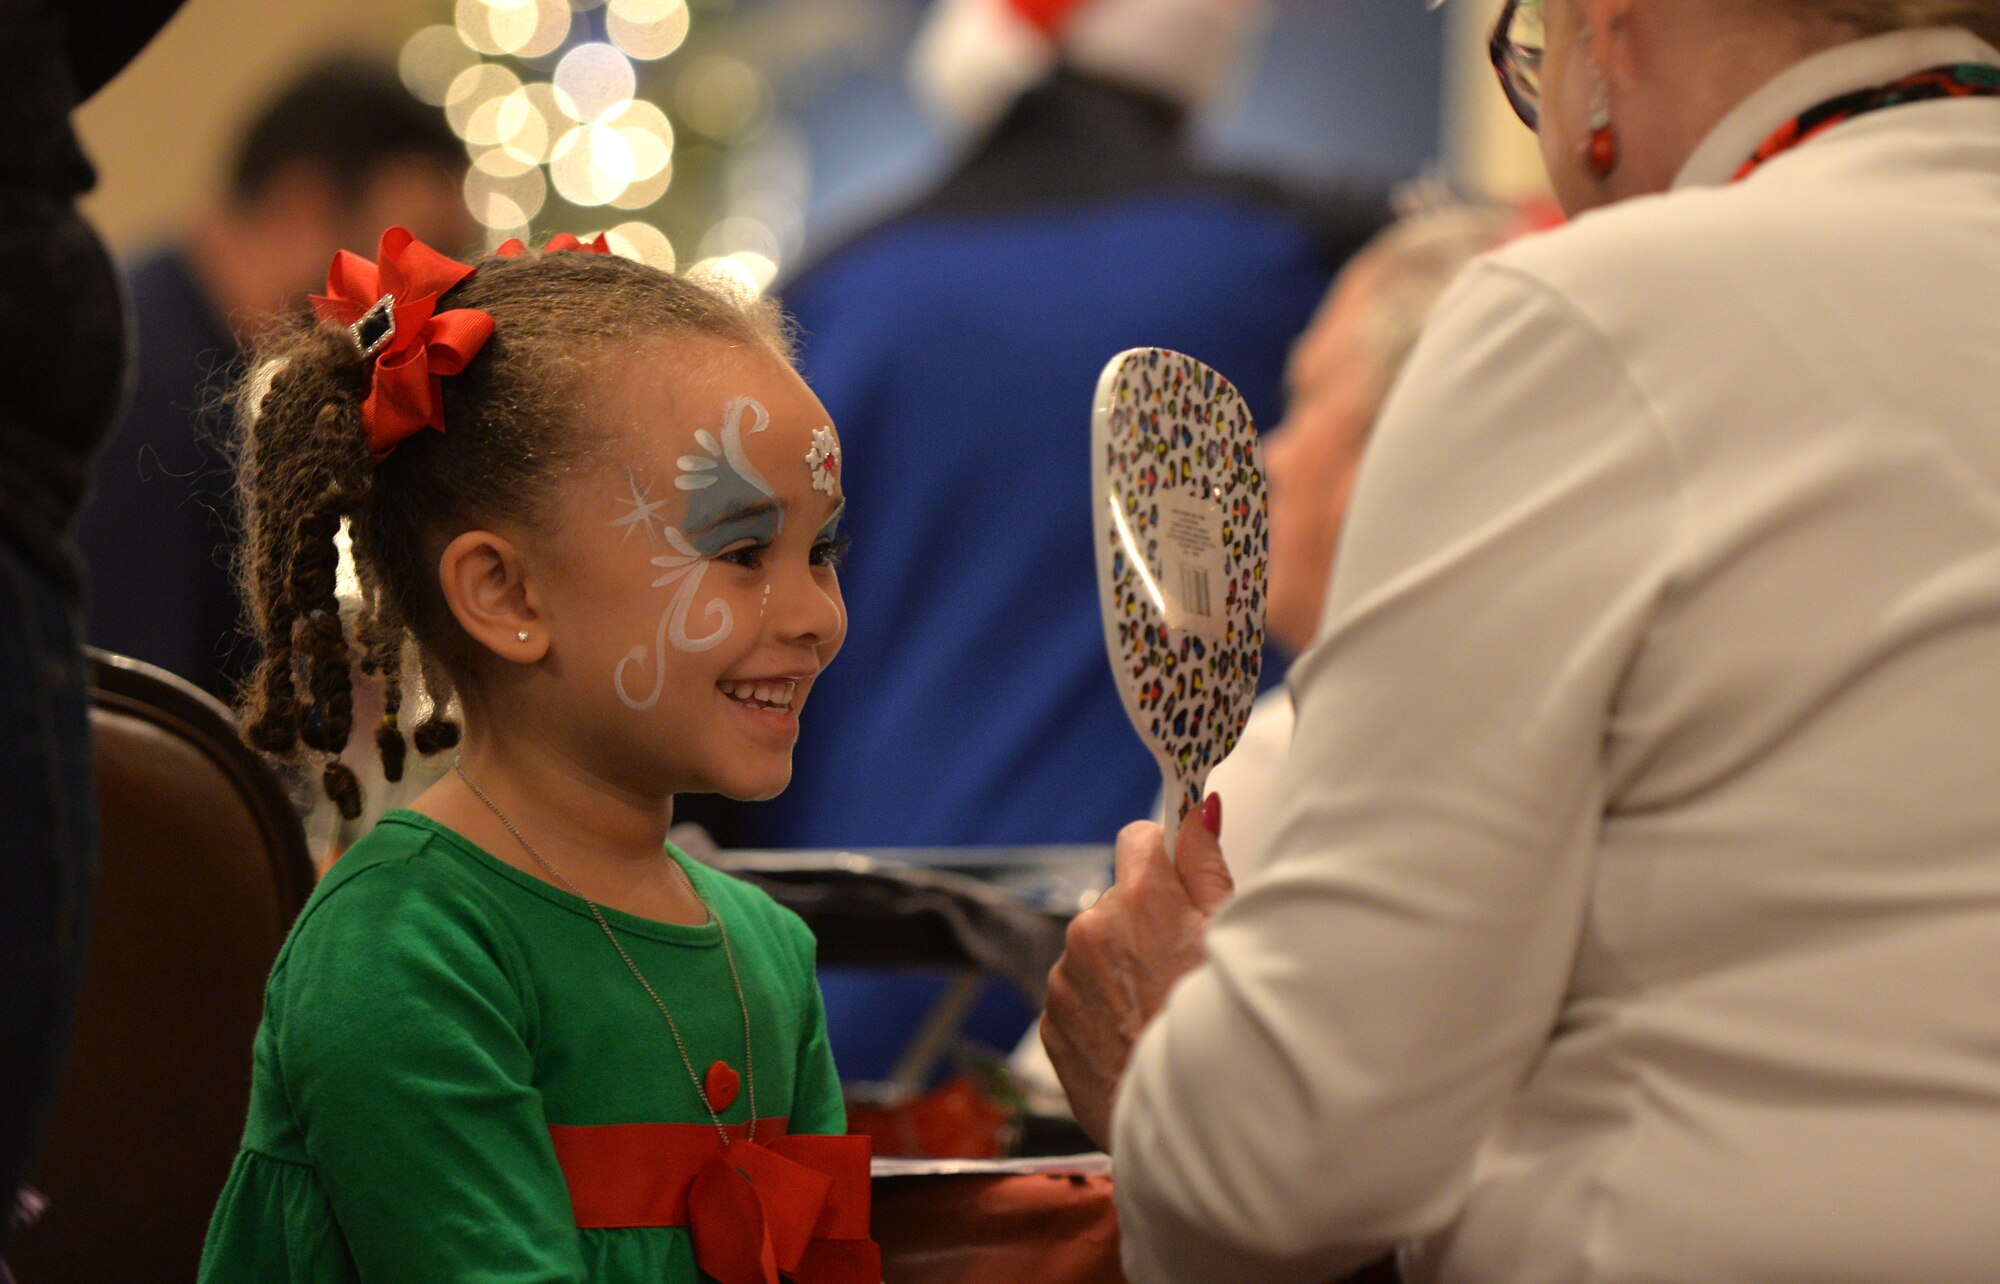 Four-year-old Gabriella, daughter of Staff Sgt. Kevin Richardson, 55th Strategic Communication Squadron, looks at her reflection during the Offutt Christmas Tree Lighting event at the Patriot Club, Offutt Air Force Base, Nebraska, Dec. 6, 2018. The ceremony included a meet and greet with Mr. and Mrs. Claus, live music, dinner, bingo and an “Elf Mart” where children had a chance to shop for their parents. (U.S. Air Force photo by Josh Plueger)